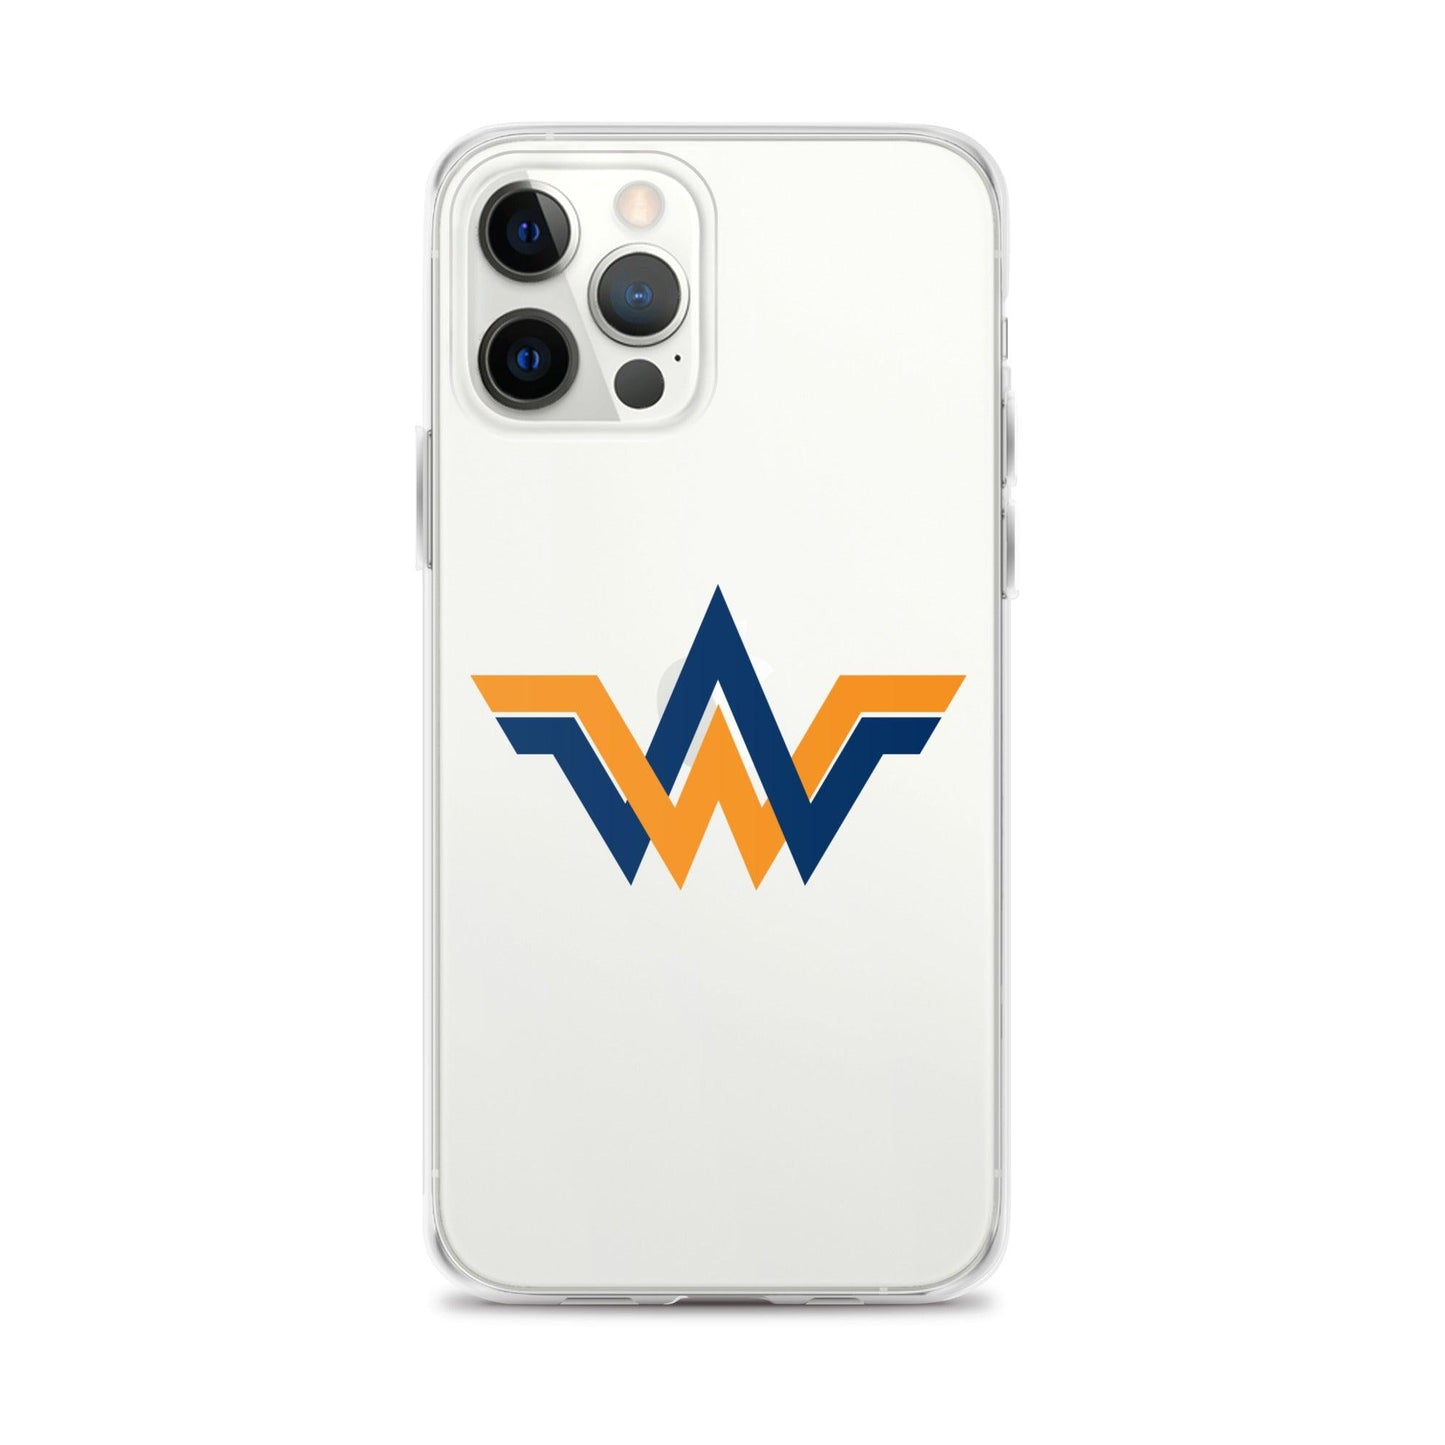 Will Wagner "Signature" iPhone Case - Fan Arch